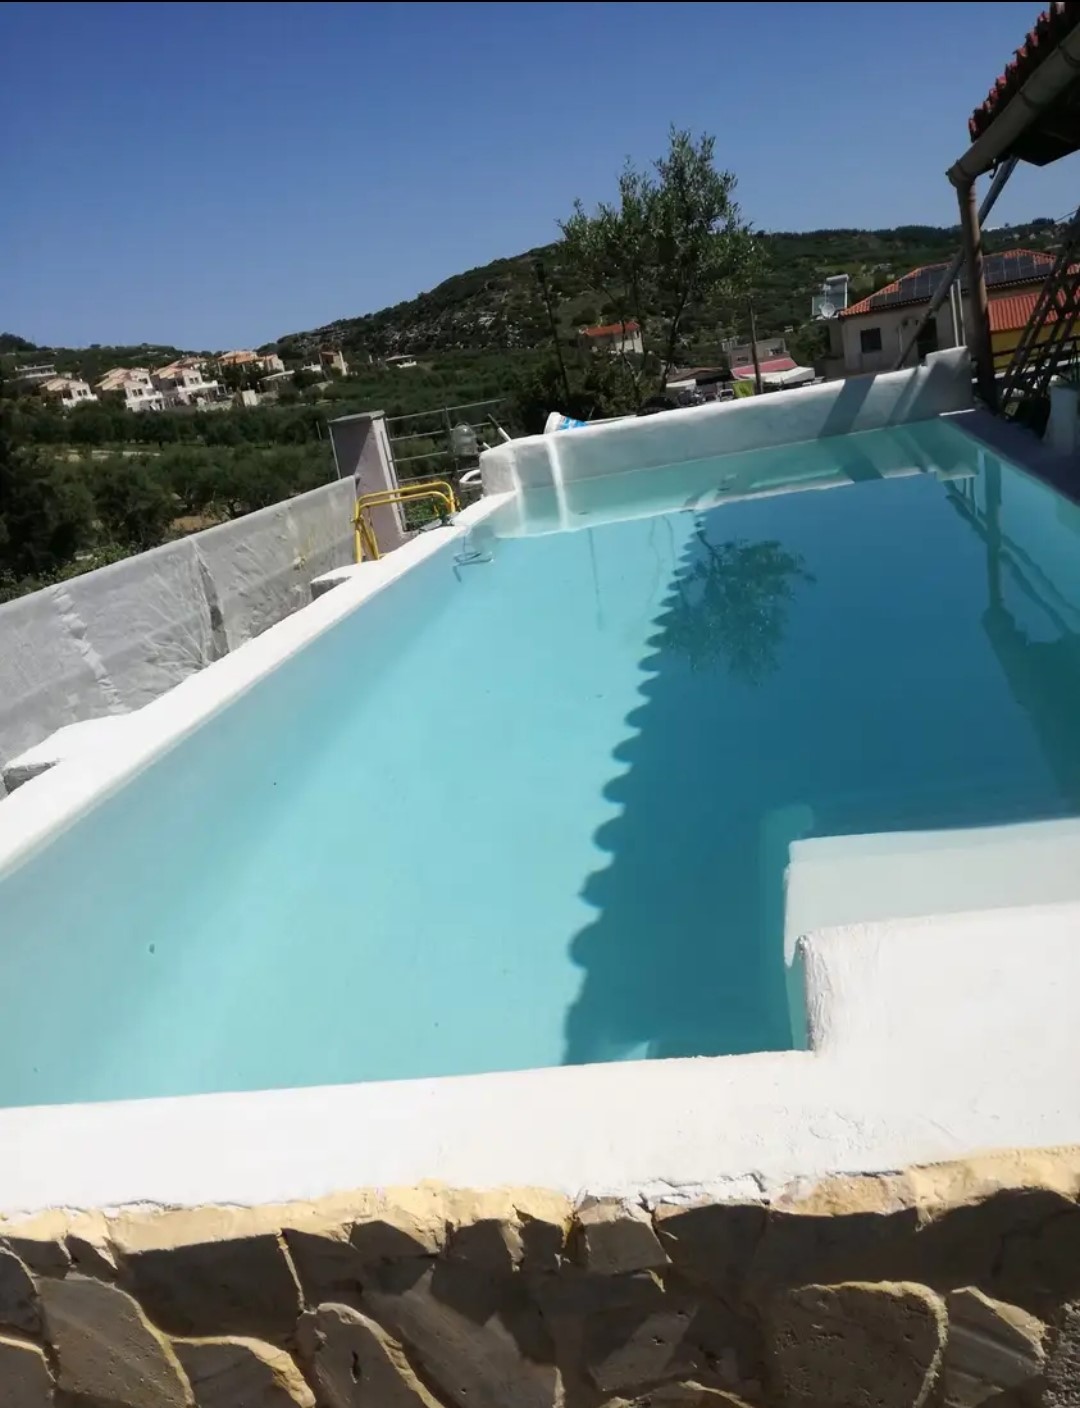 Detached house of approximately 100m2 for sale with a swimming pool.